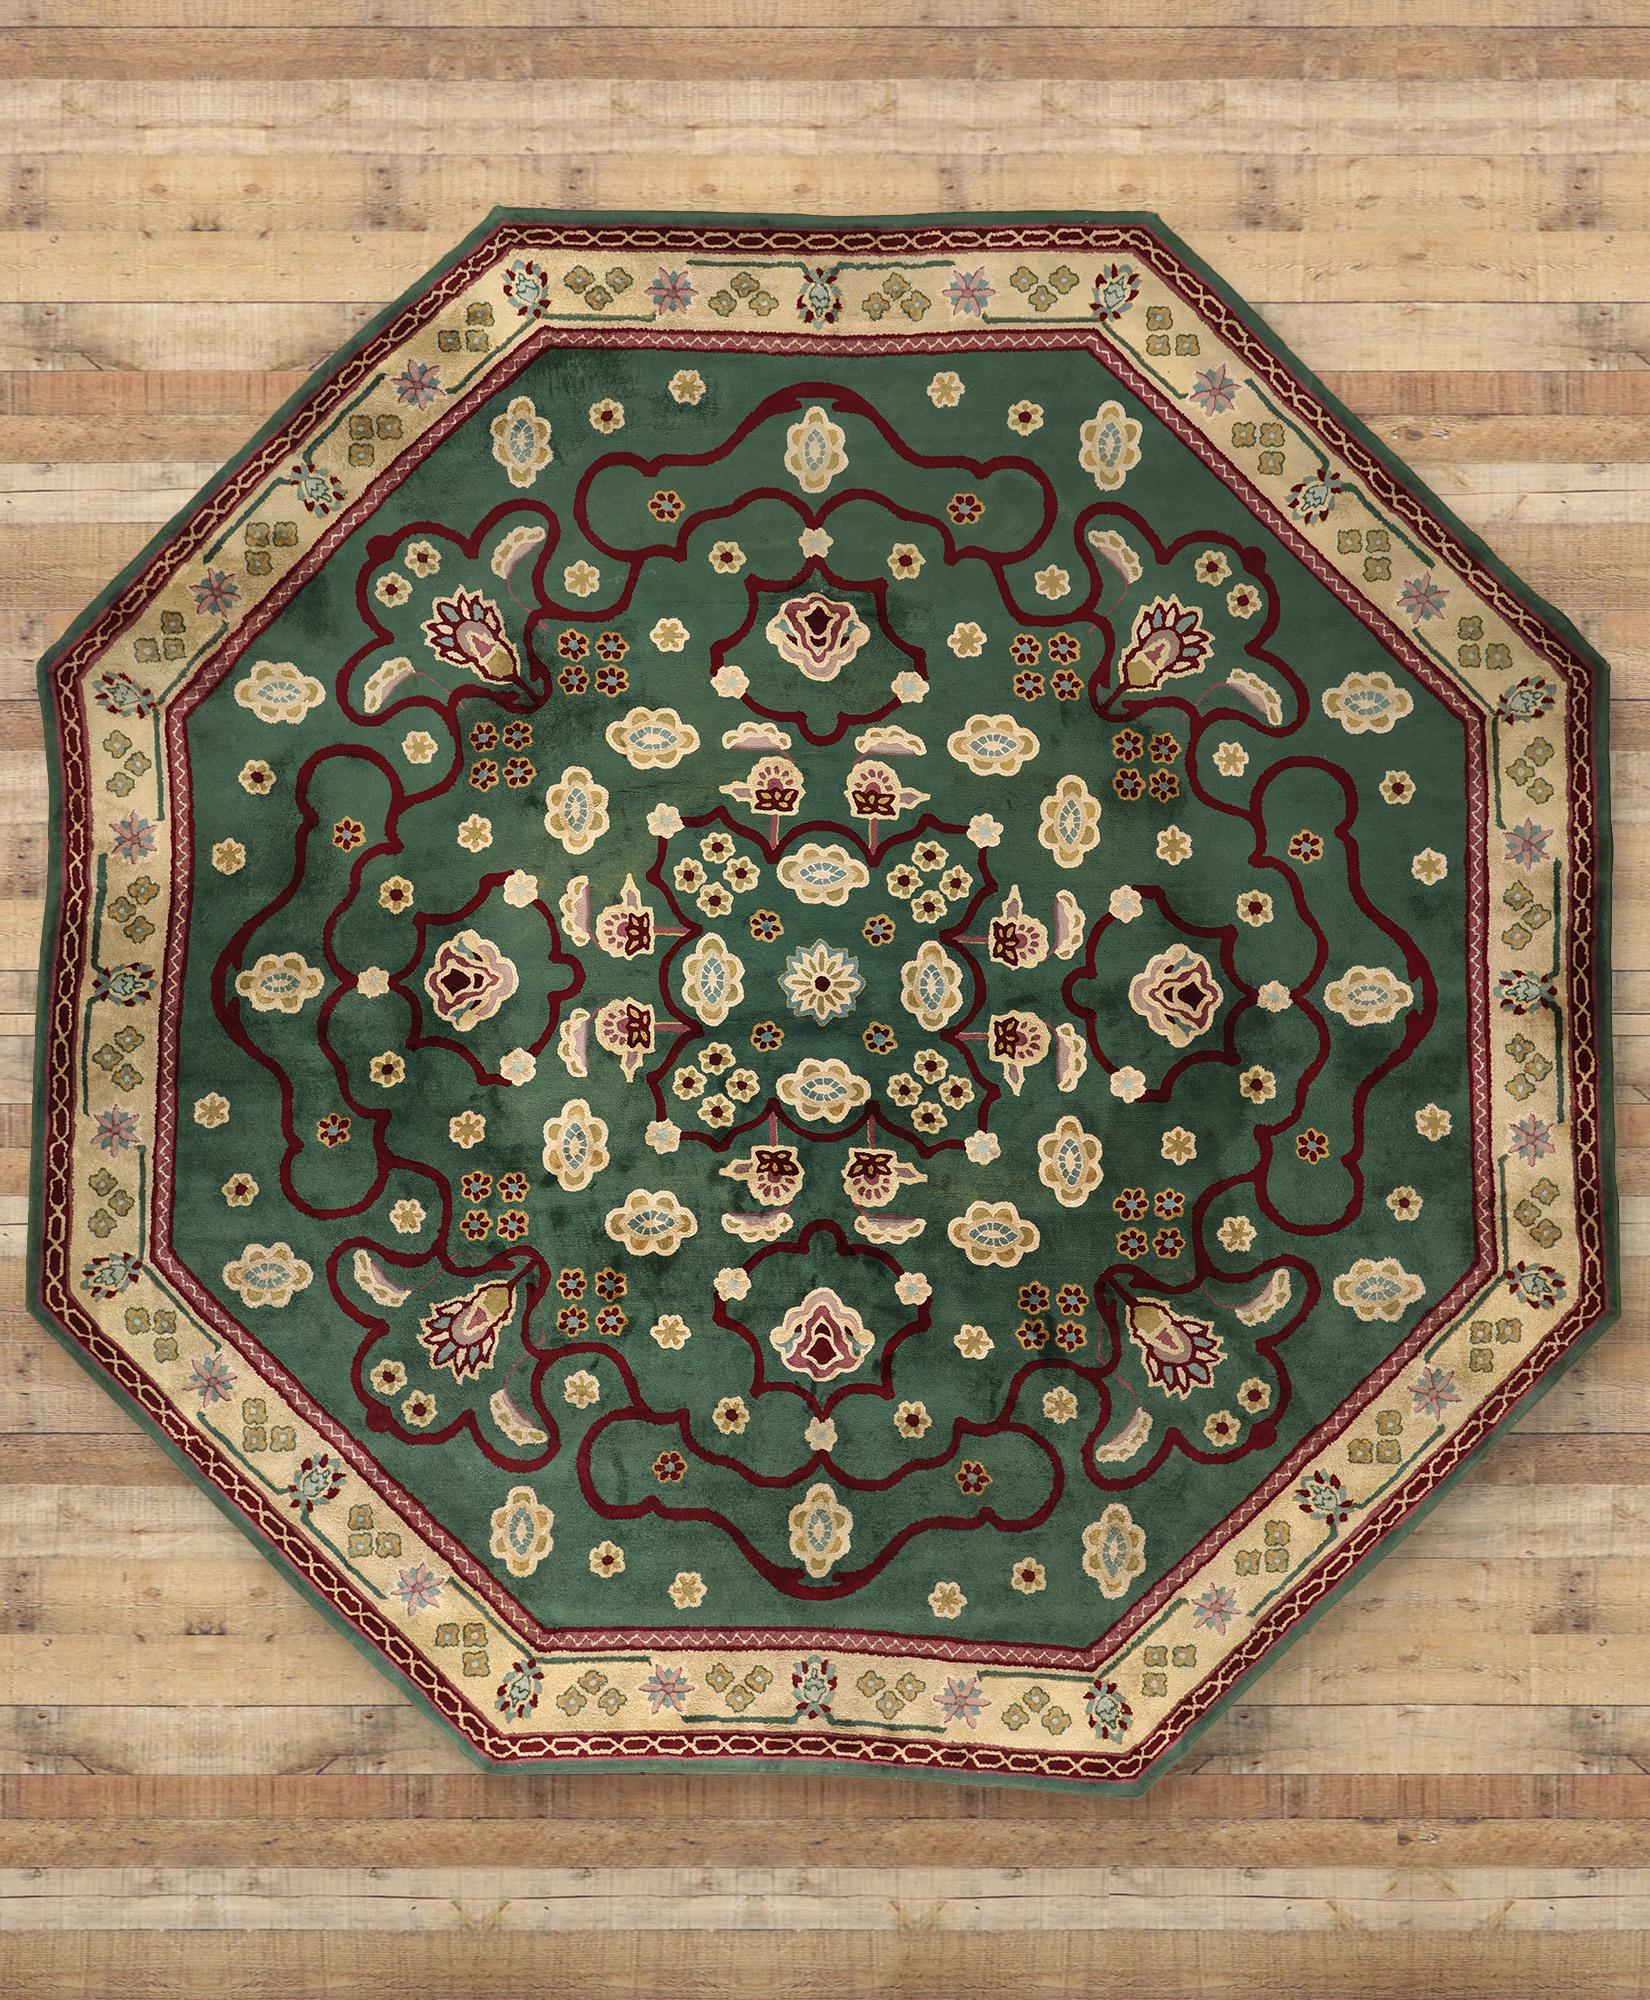 Vintage Oversize Octagon Edward Fields Rug with Regal Old World Style For Sale 4